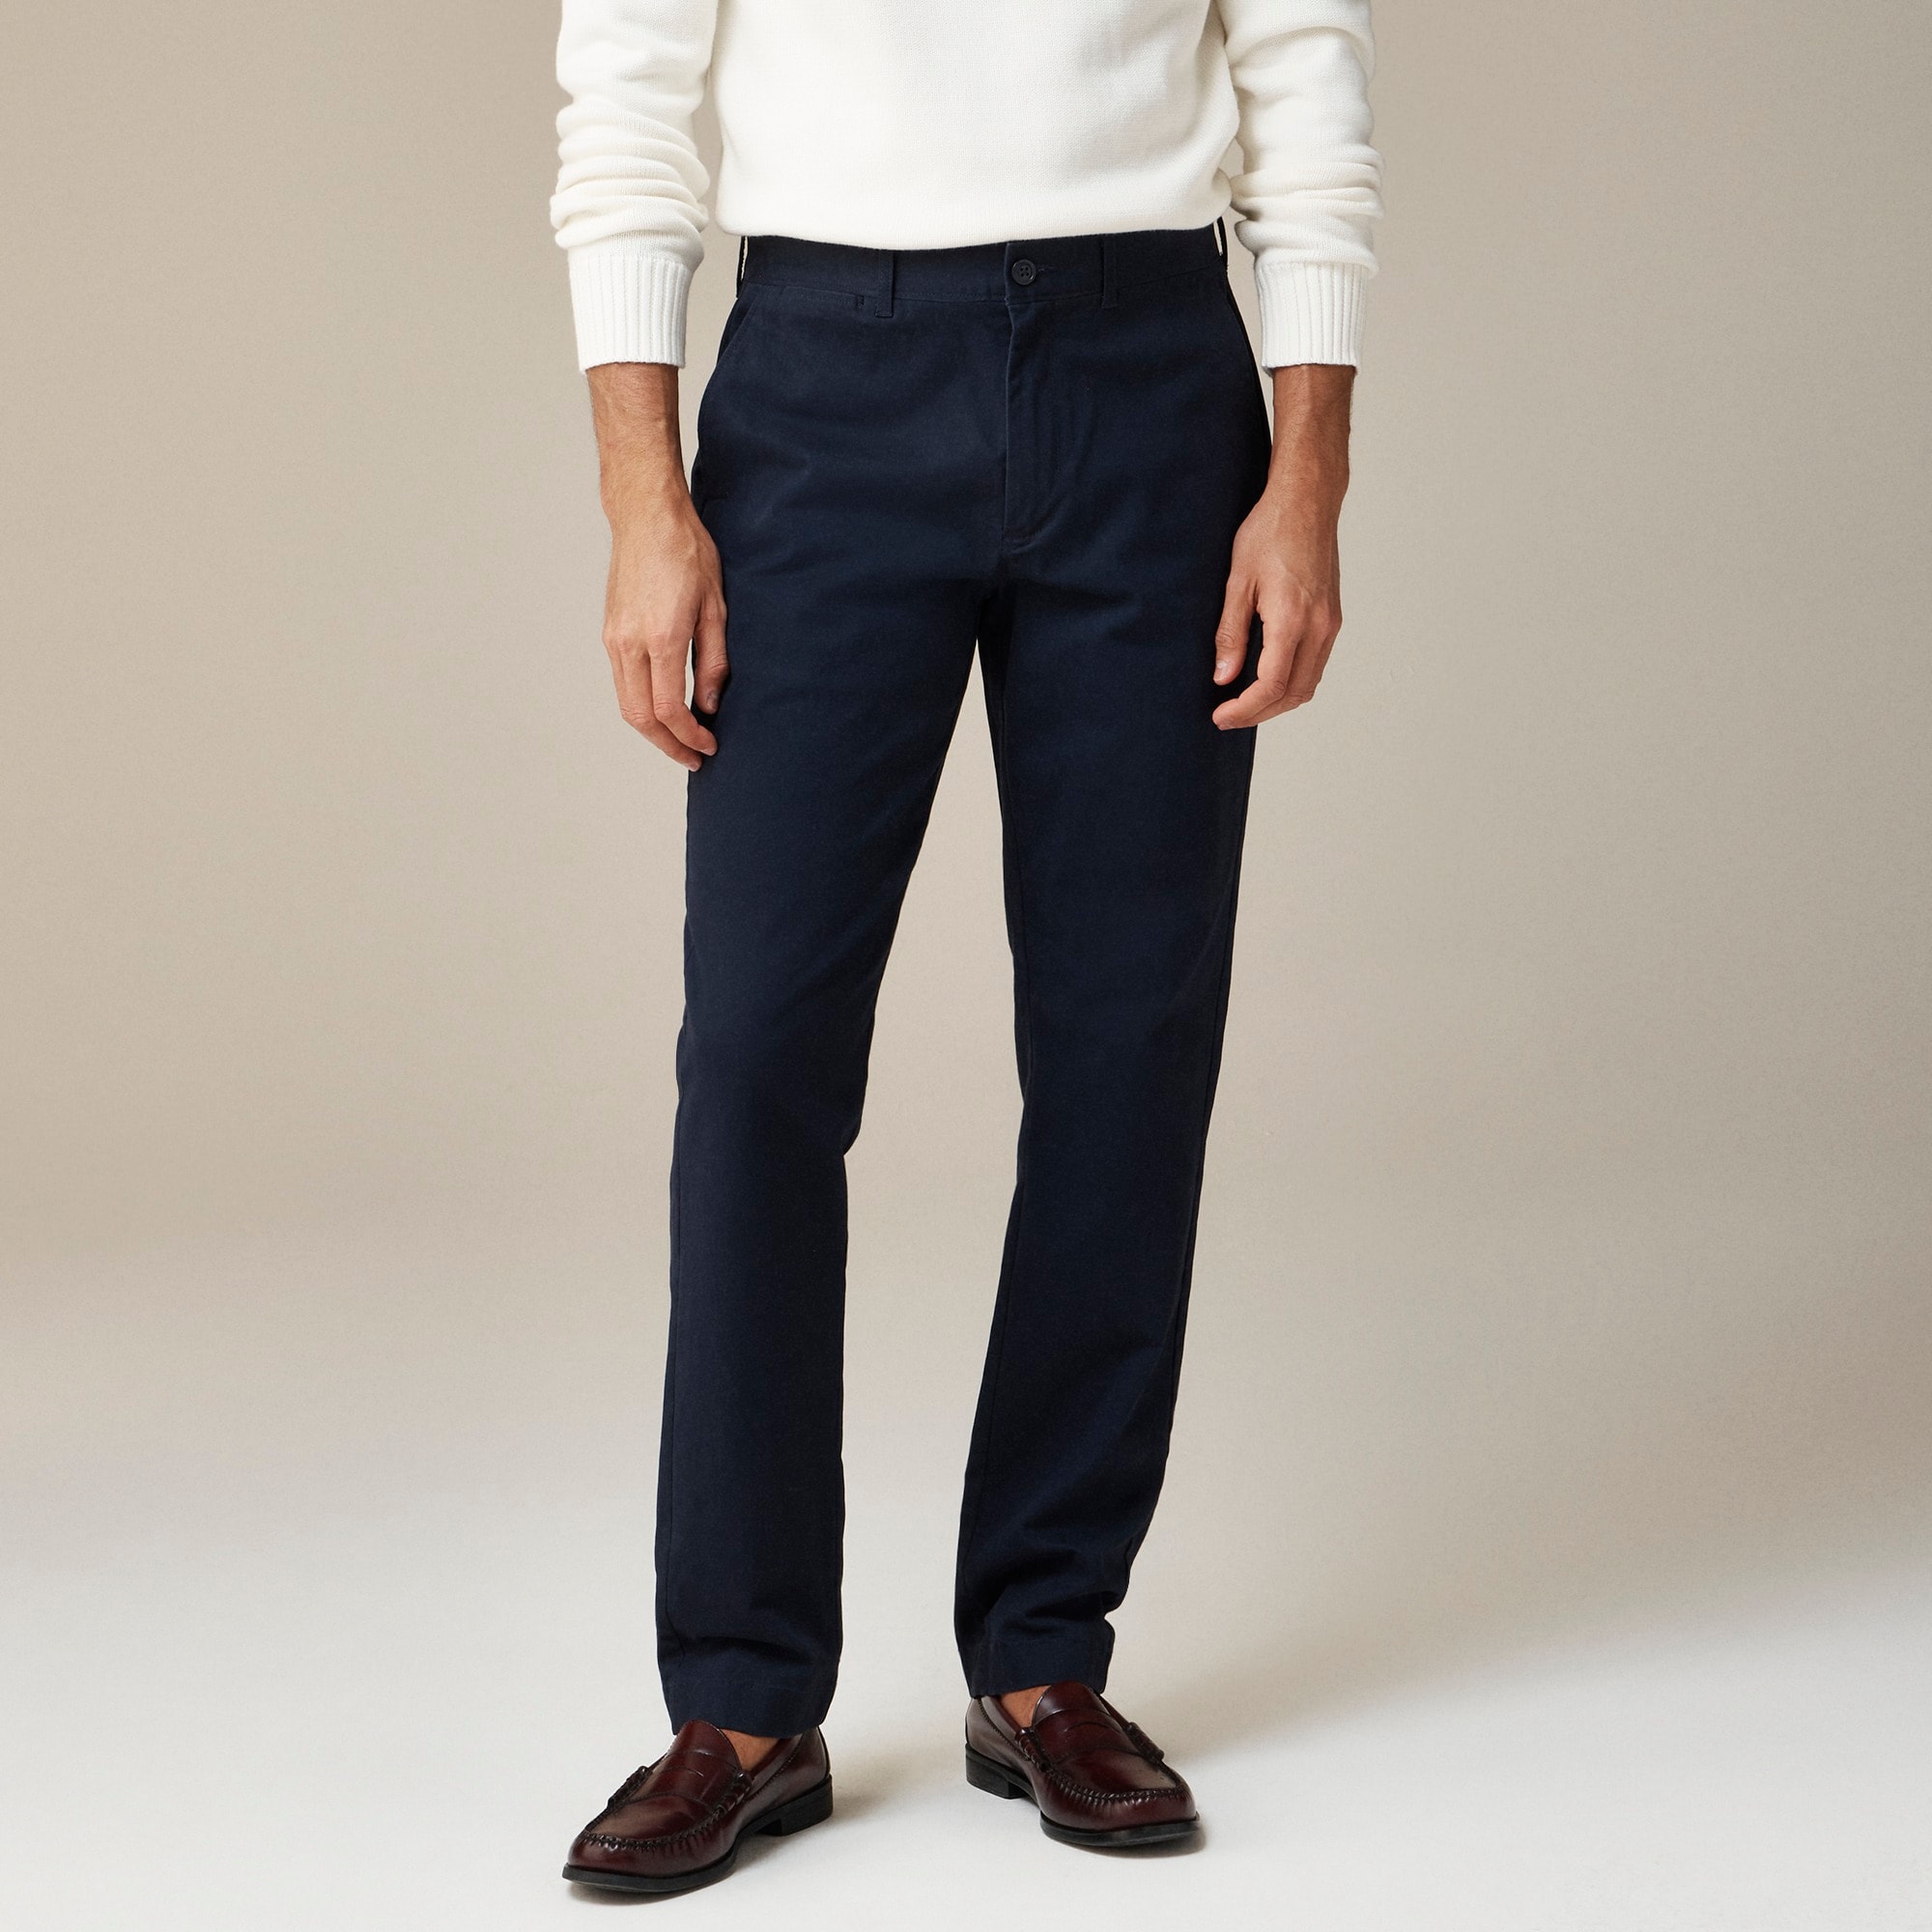 j.crew: 1040 athletic tapered-fit stretch chino pant for men